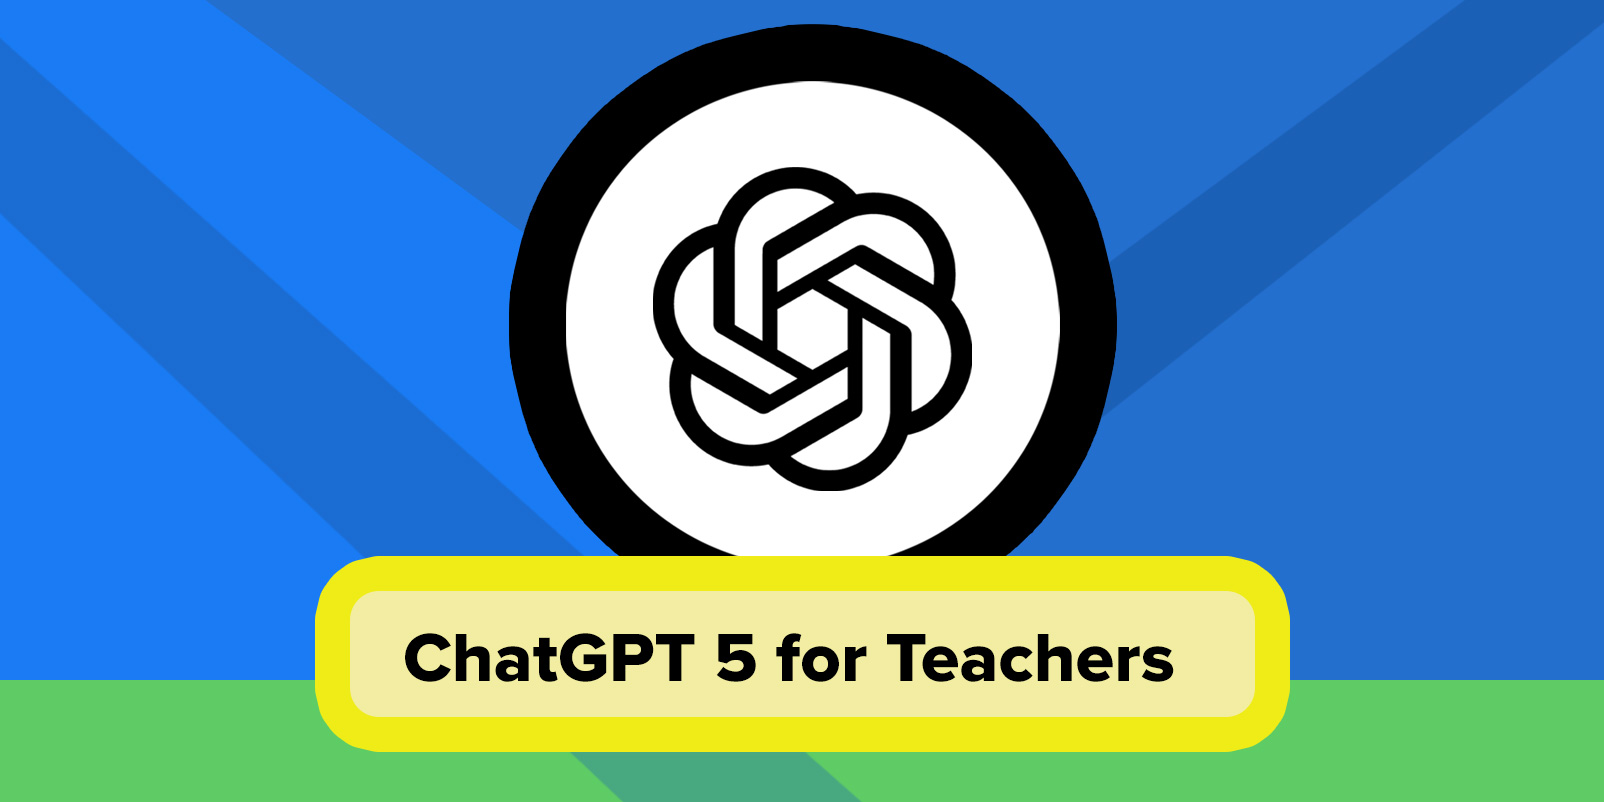 ChatGPT-5 for teachers by Open AI graphic